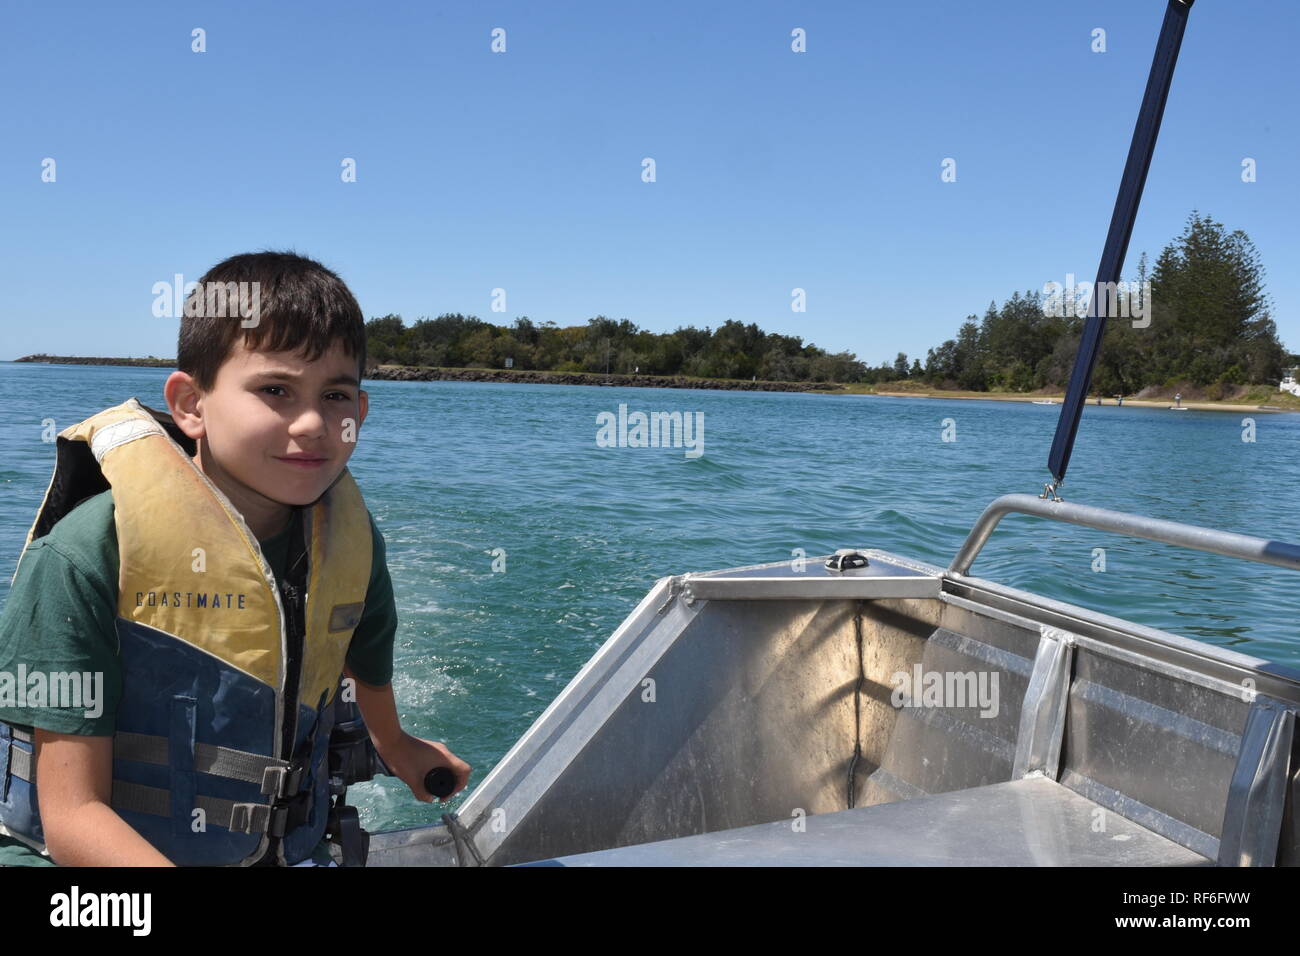 Young boy in a life jacket, driving a small tinny boat on the Brunswick River, New South Wales, Australia Stock Photo